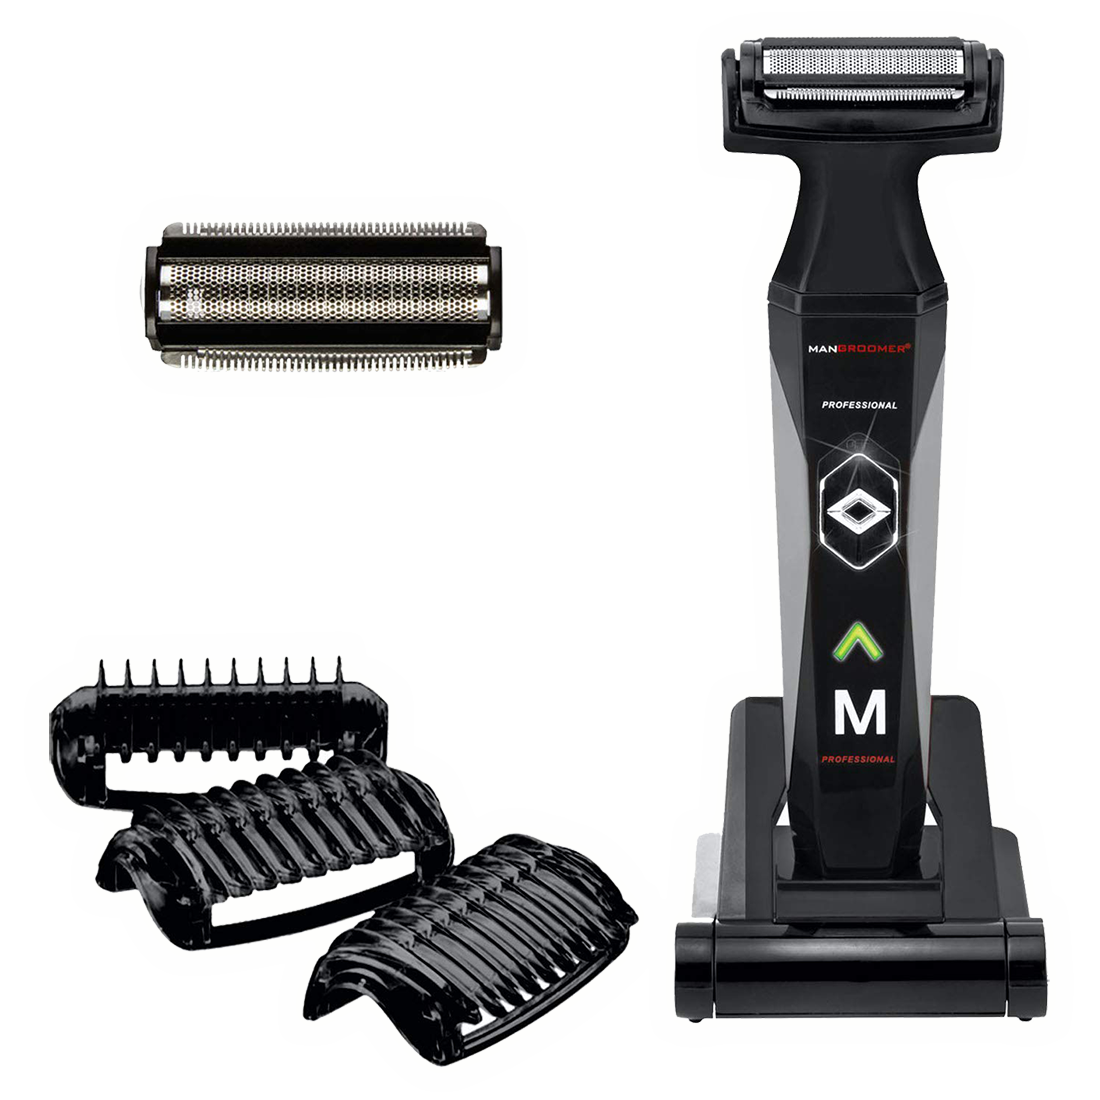 MANGROOMER PROFESSIONAL Body Groomer and Trimmer Specifications